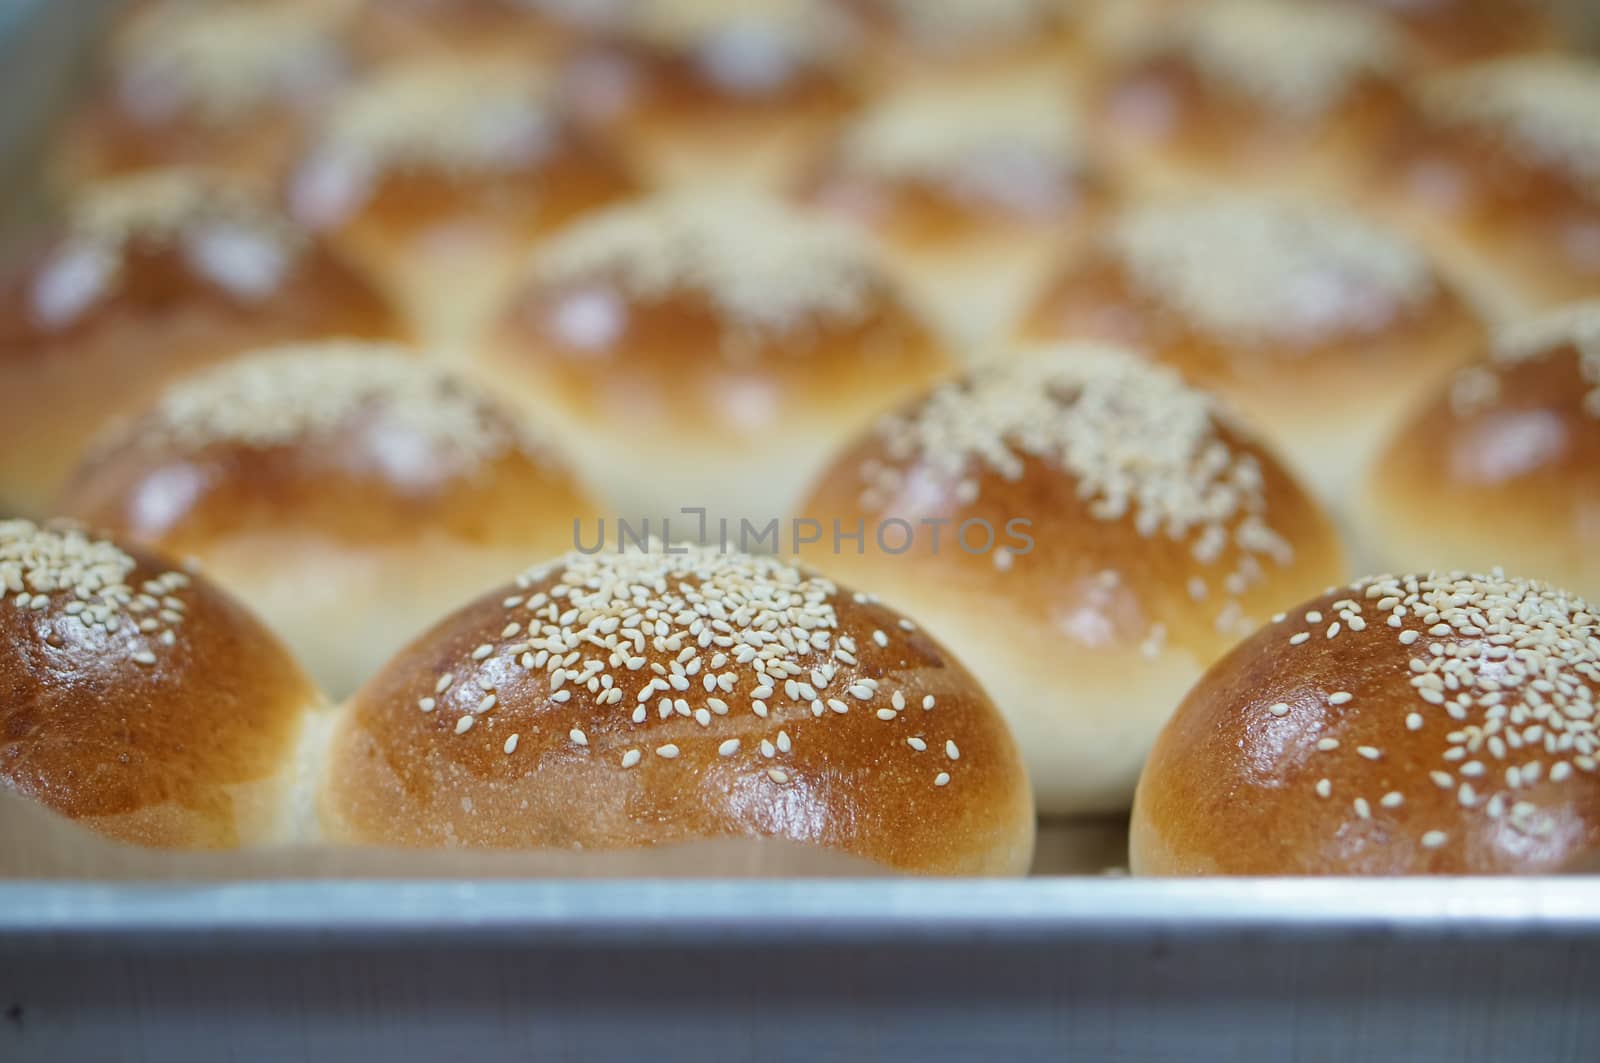 Round loaf of bread with sesame seeds on tray  by ninun